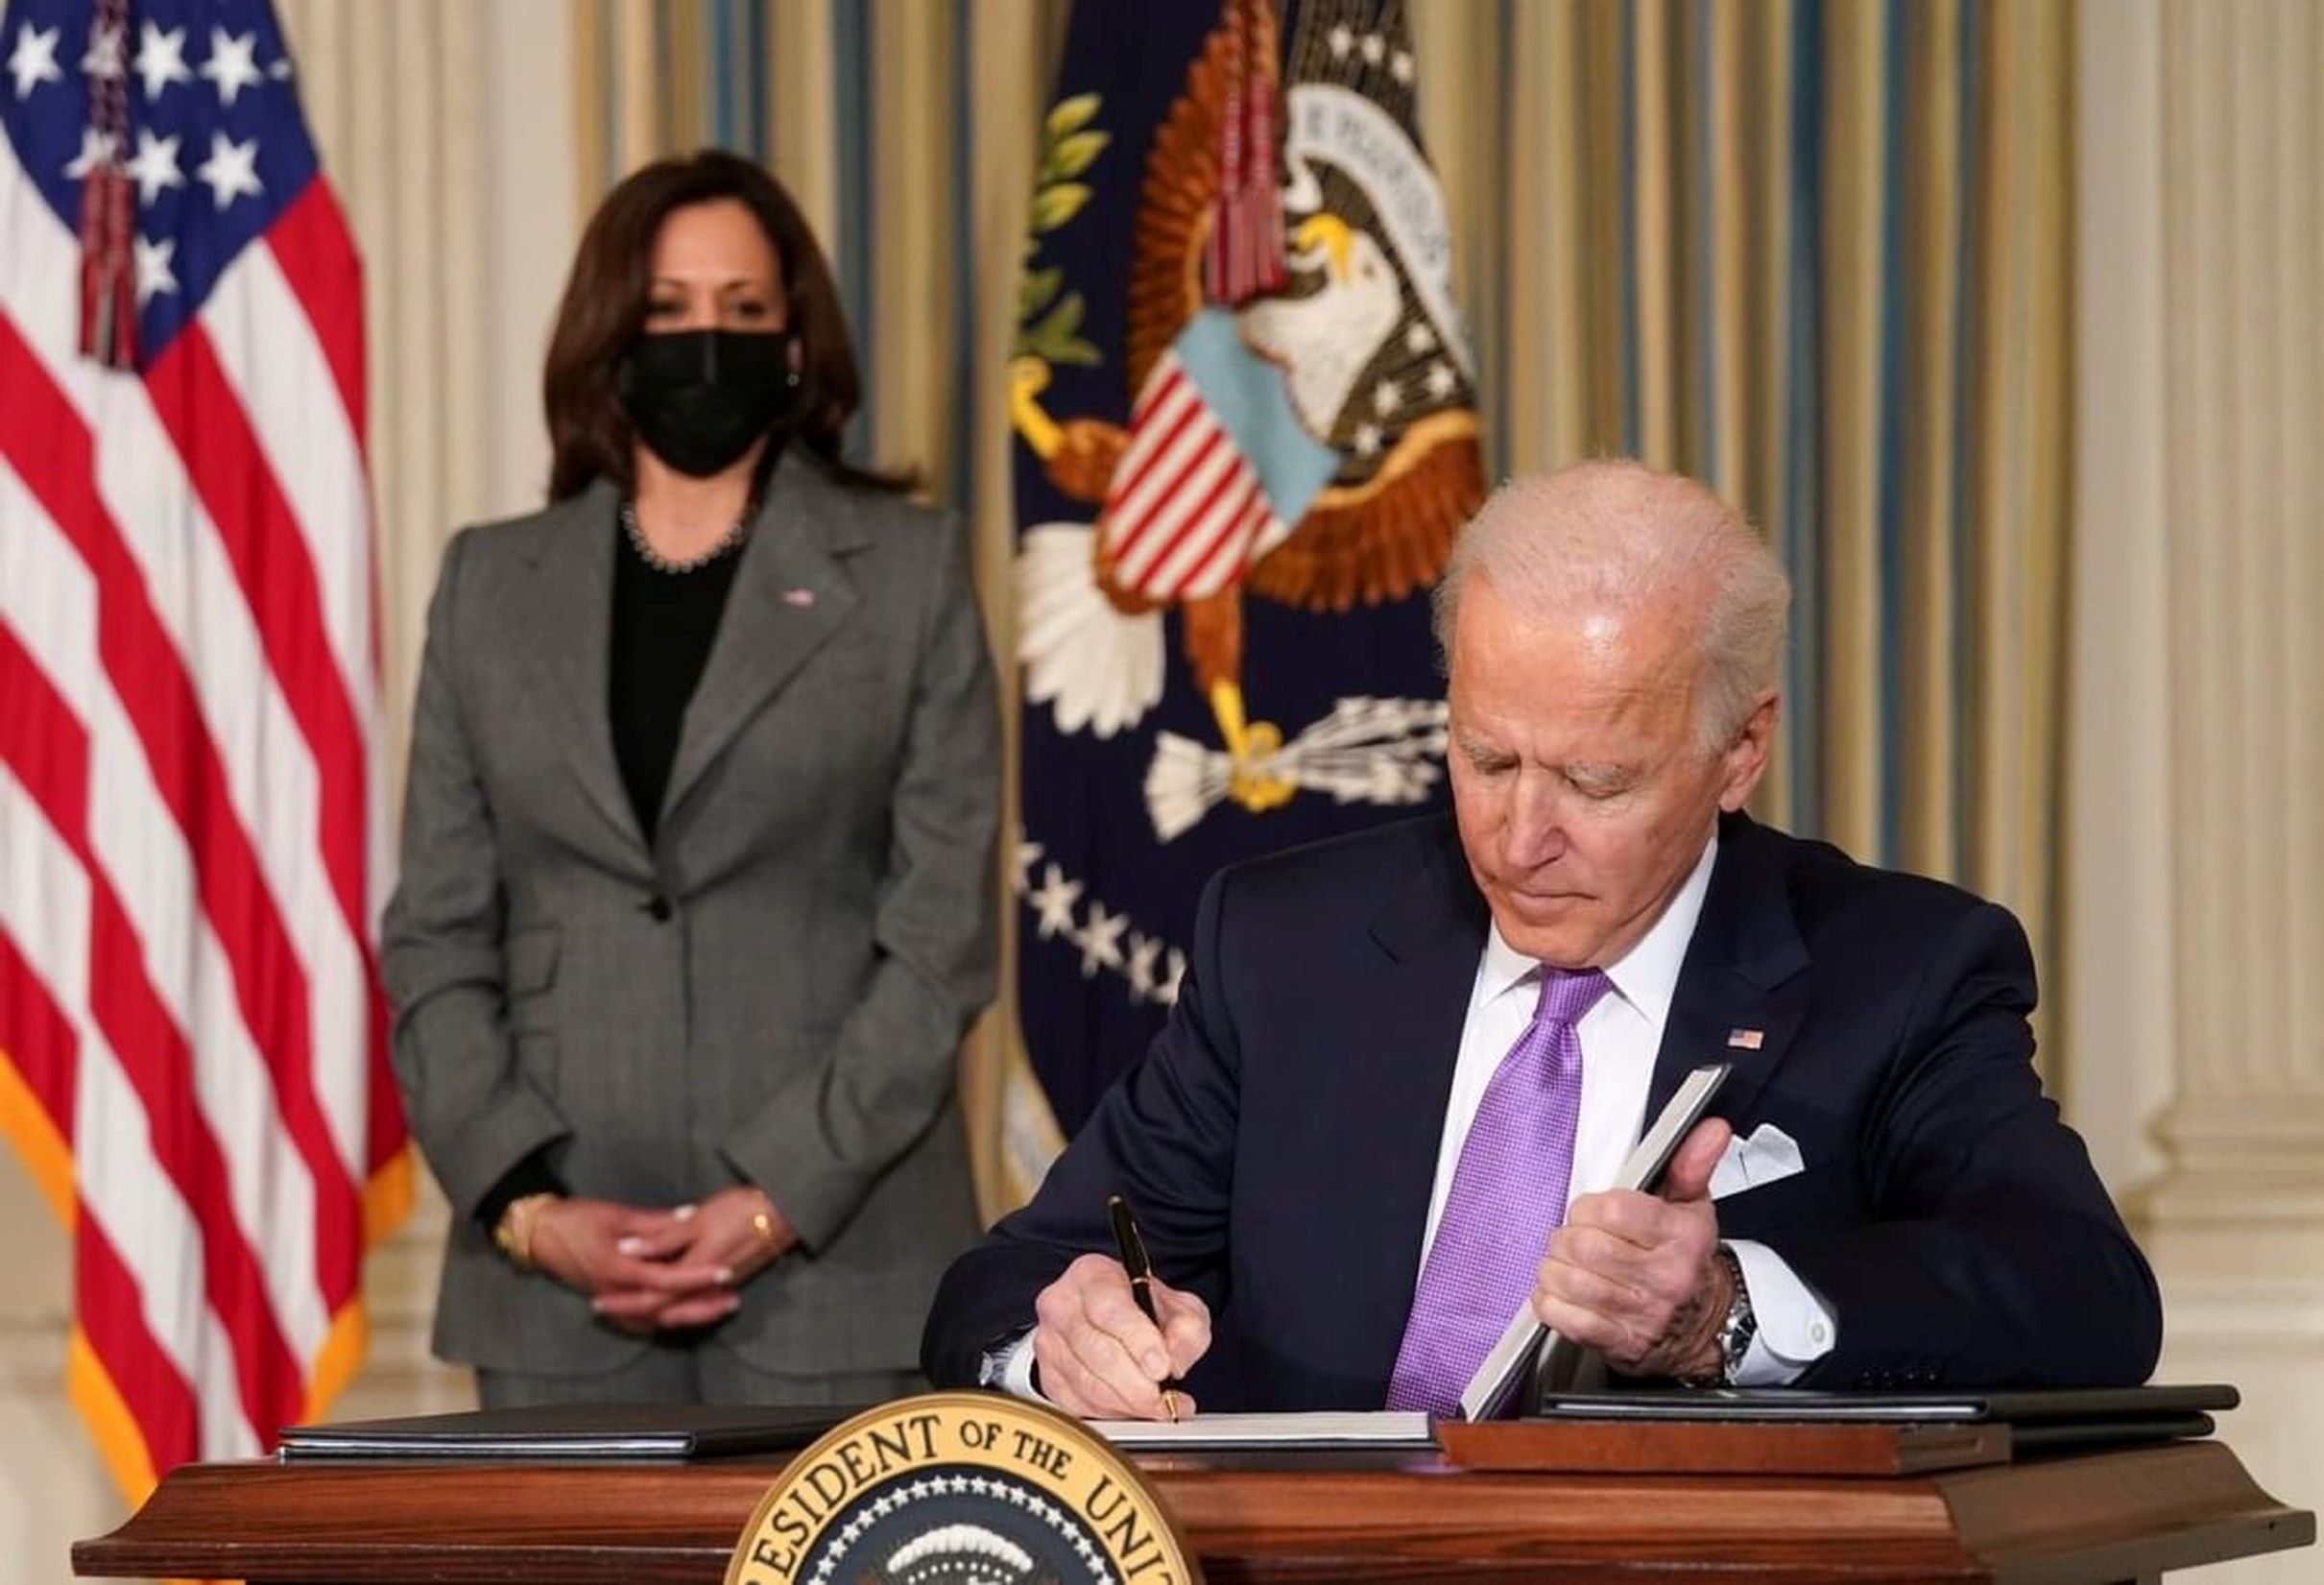 Biden signed an order revoking a key permit for the Keystone XL pipeline on his first day in office in January. 